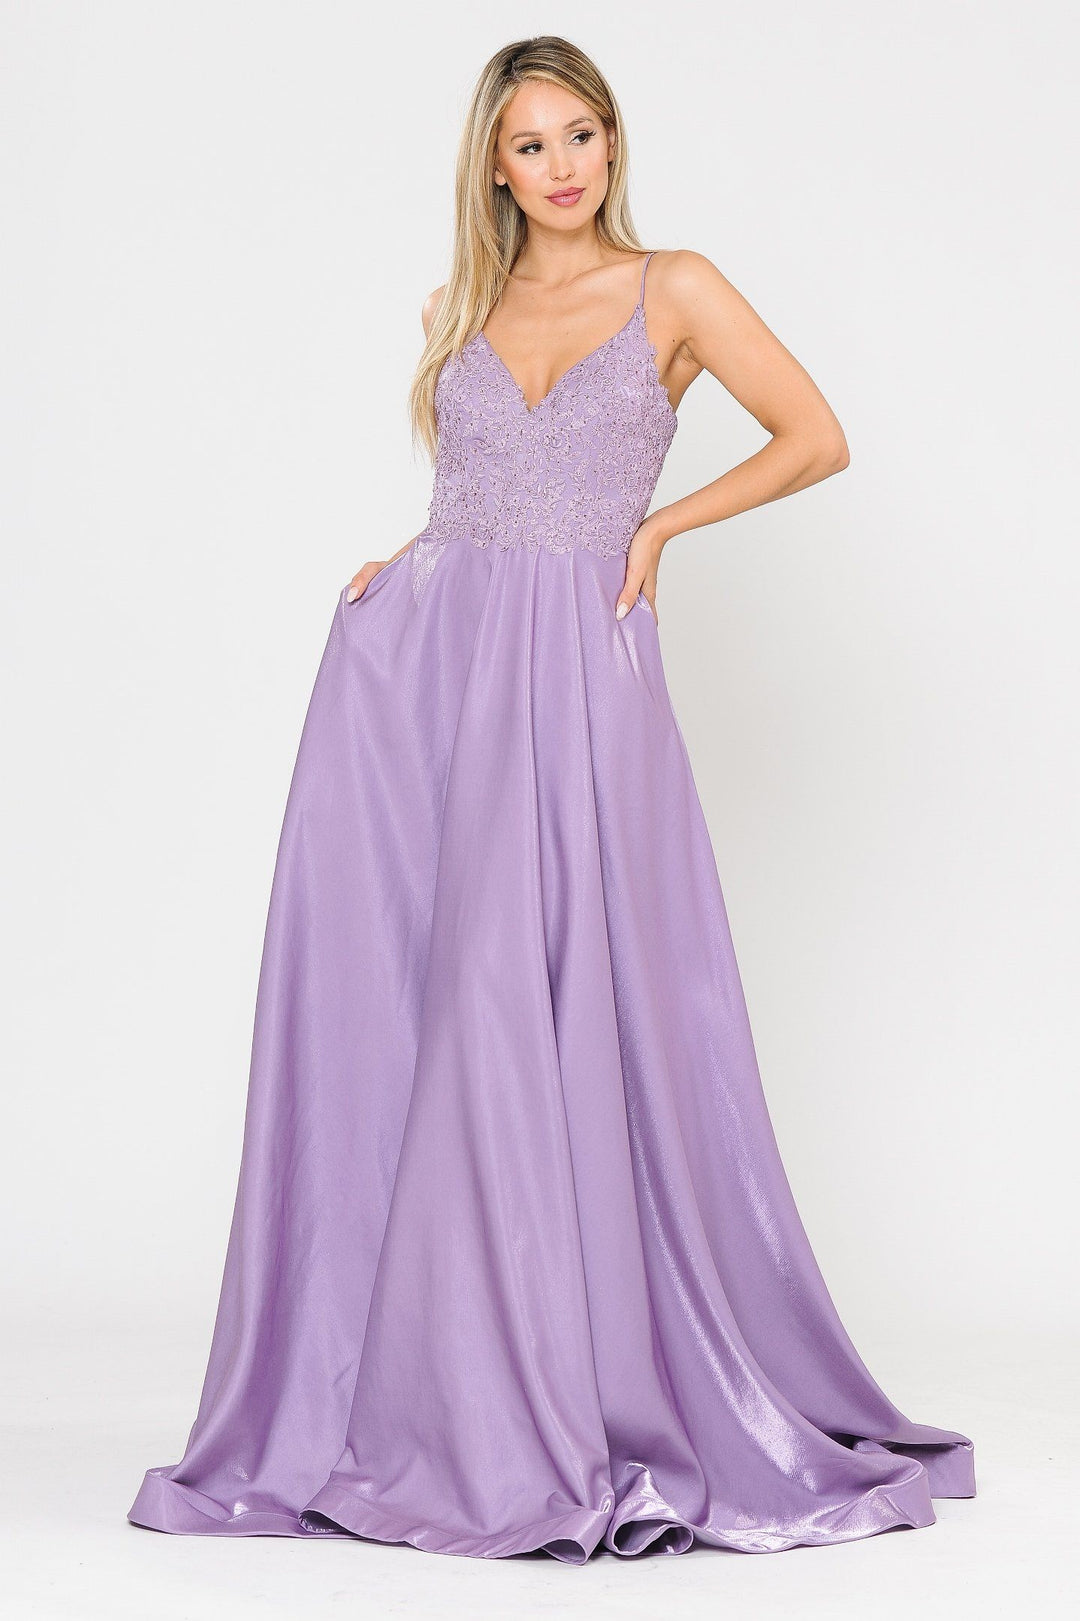 Long A-line Dress with Lace Bodice by Poly USA 8670